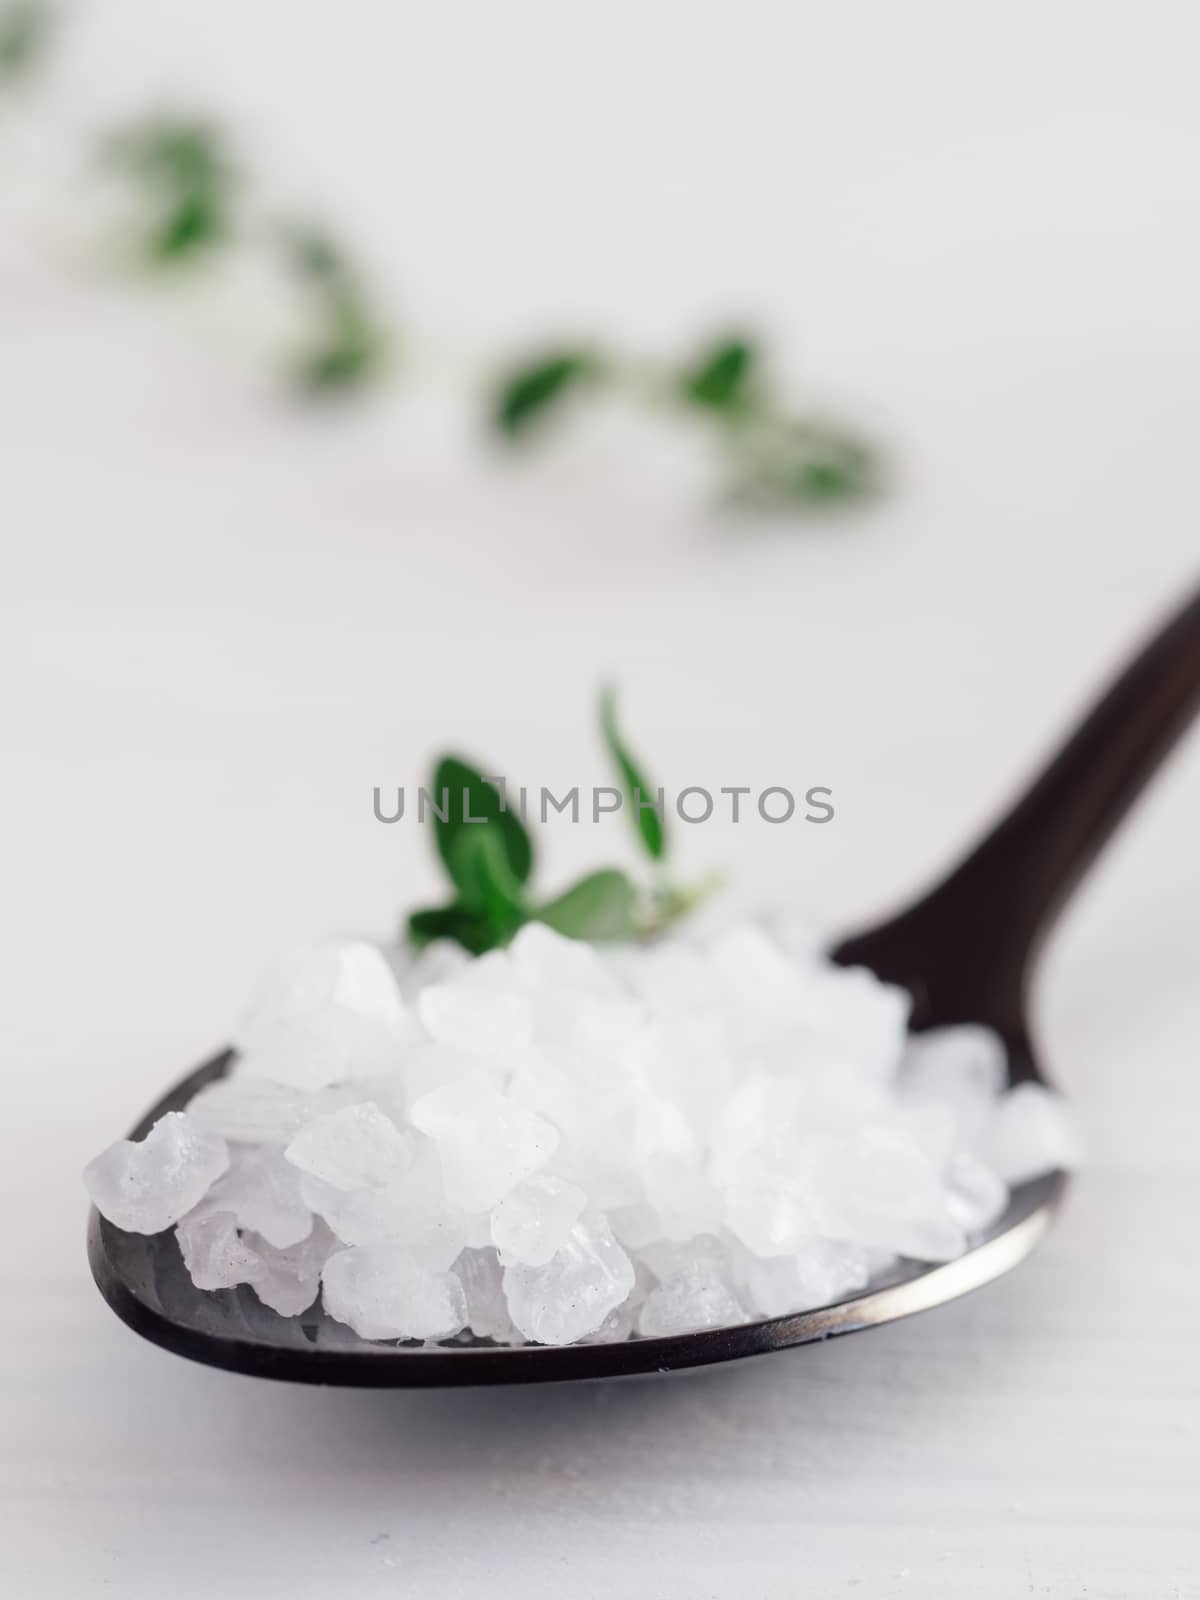 coarse sea salt in black spoon on white background with thyme. Copy space.